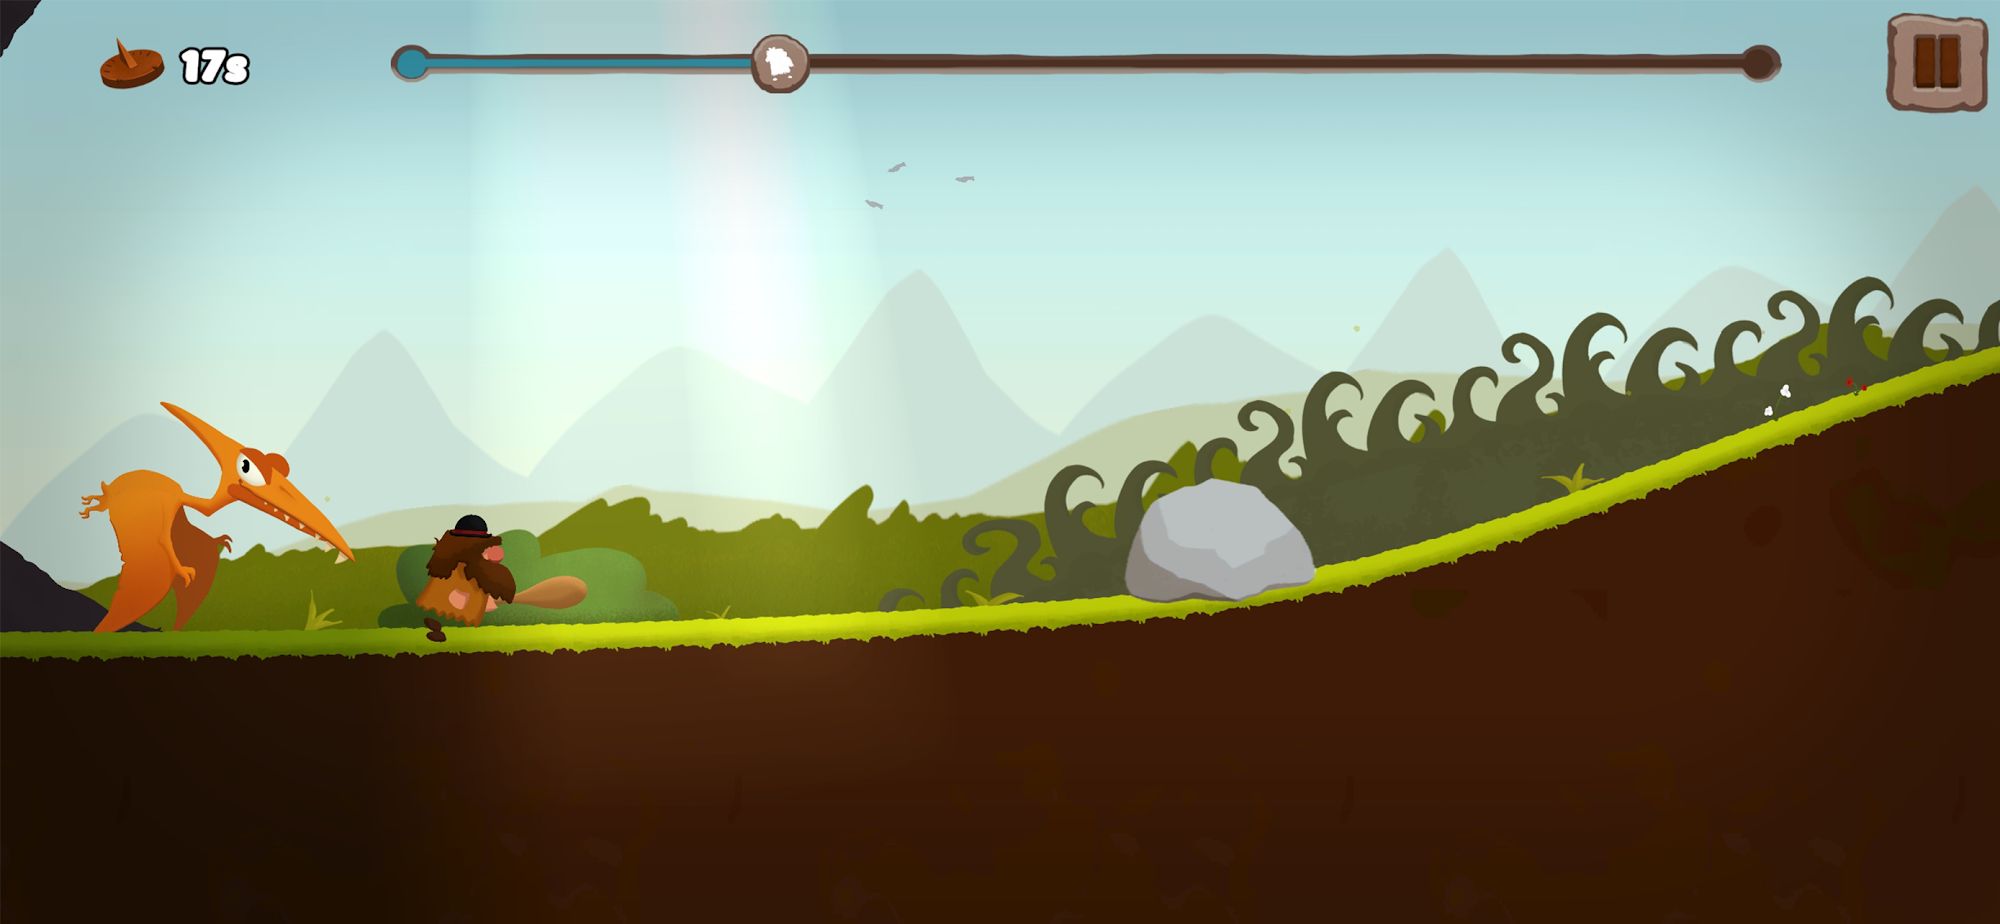 Télécharger The Grugs : Run for fun pour Android gratuit.